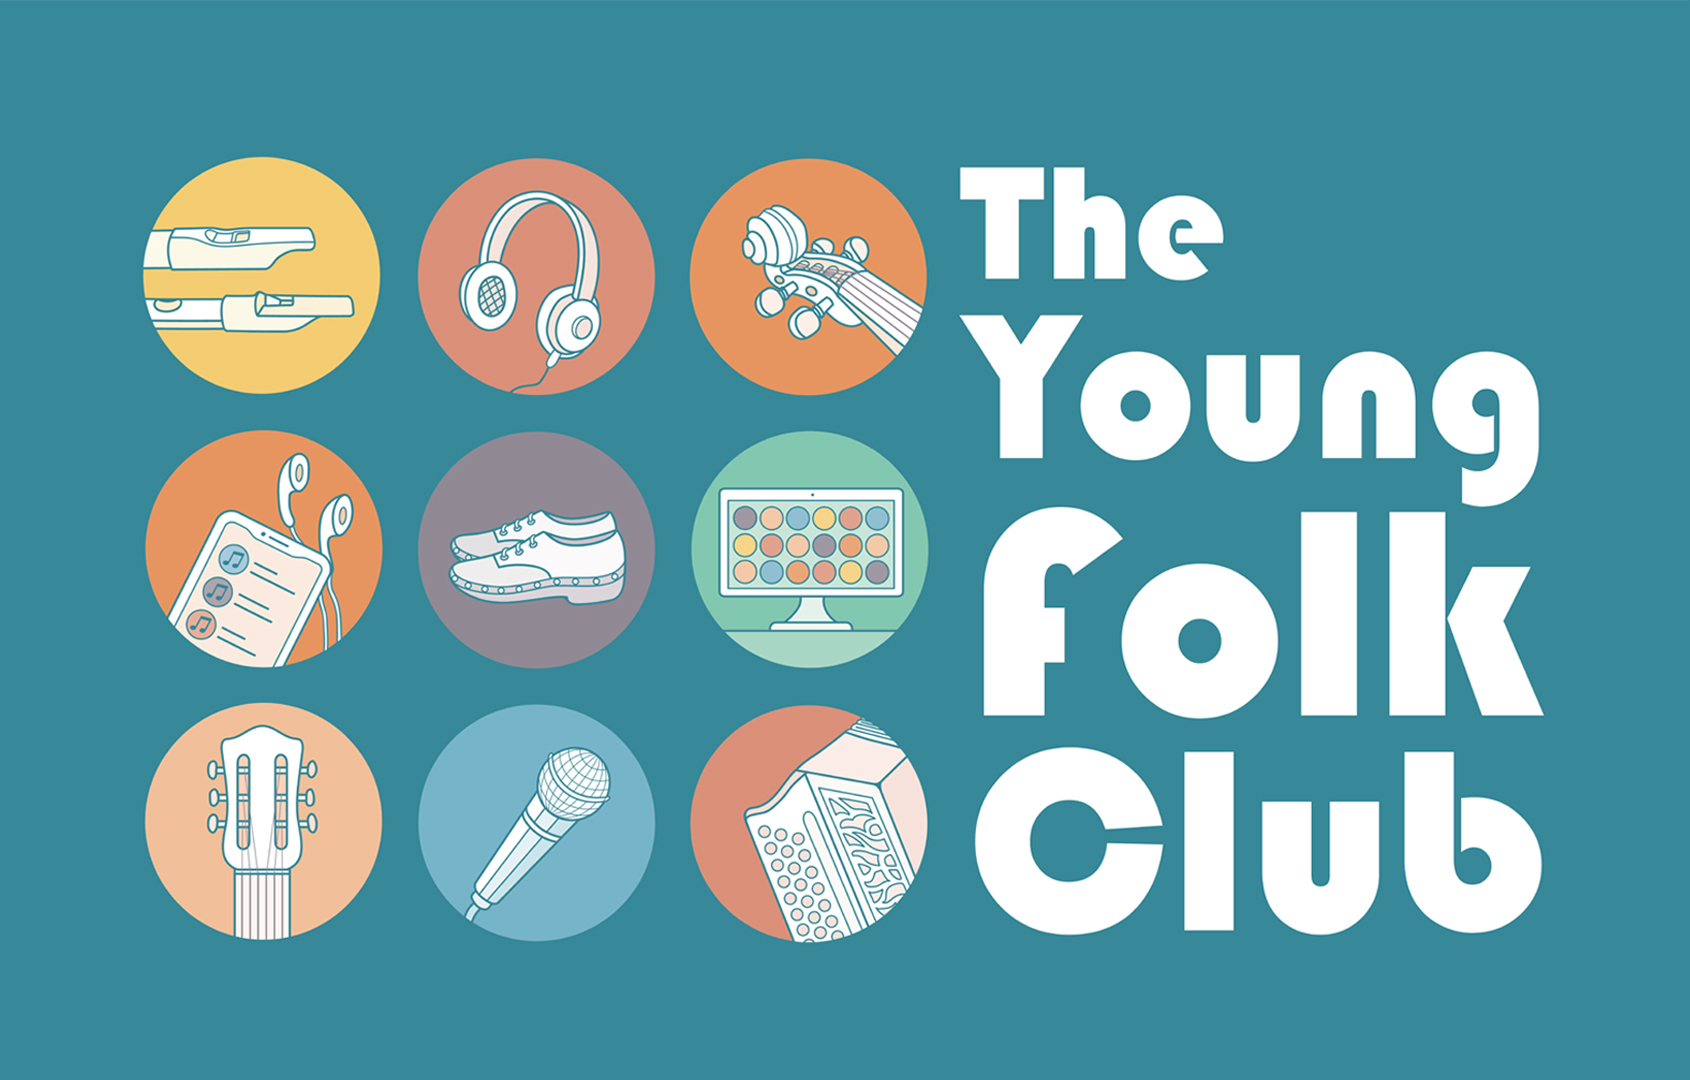 The Young Folk Club Graphic Logo, including illustrations of headphones, musical instruments, and a pair of shoes.